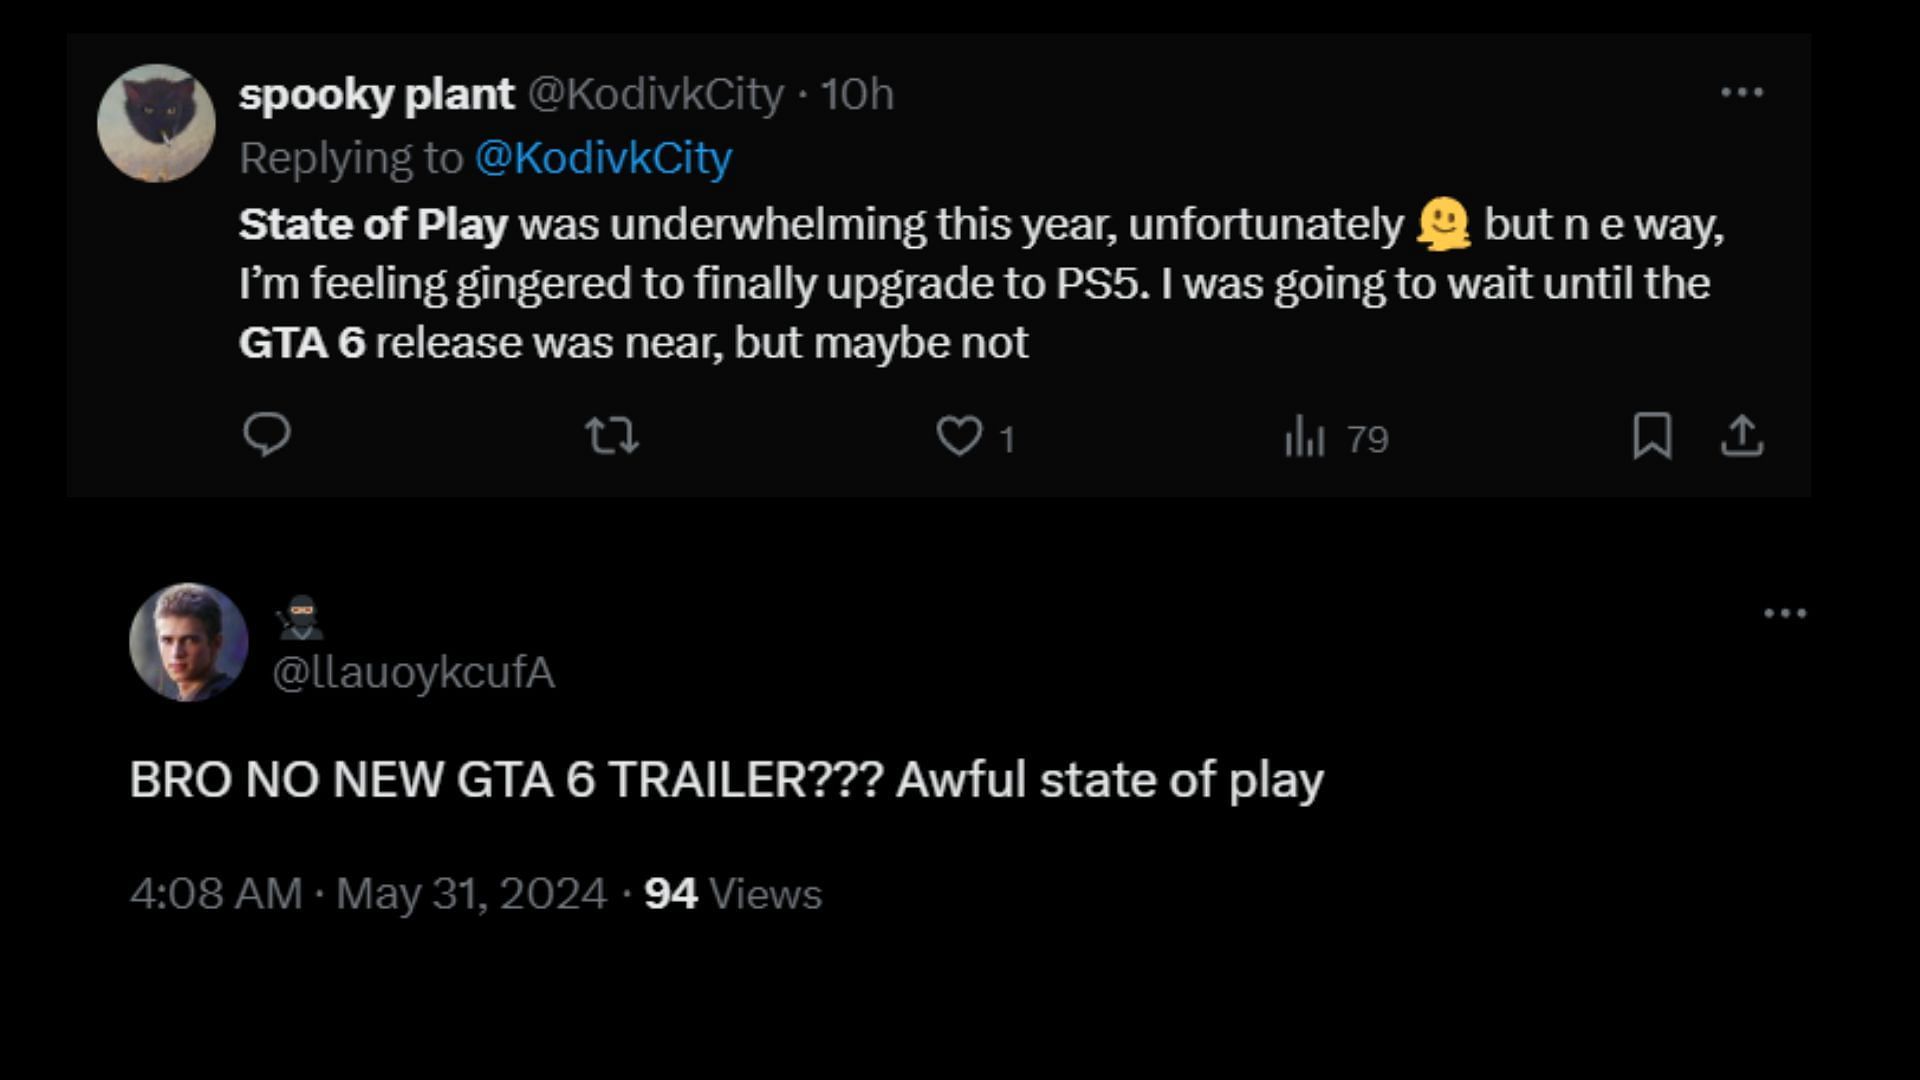 Fans were disappointed not to see the second GTA 6 trailer during the event (Image via X)